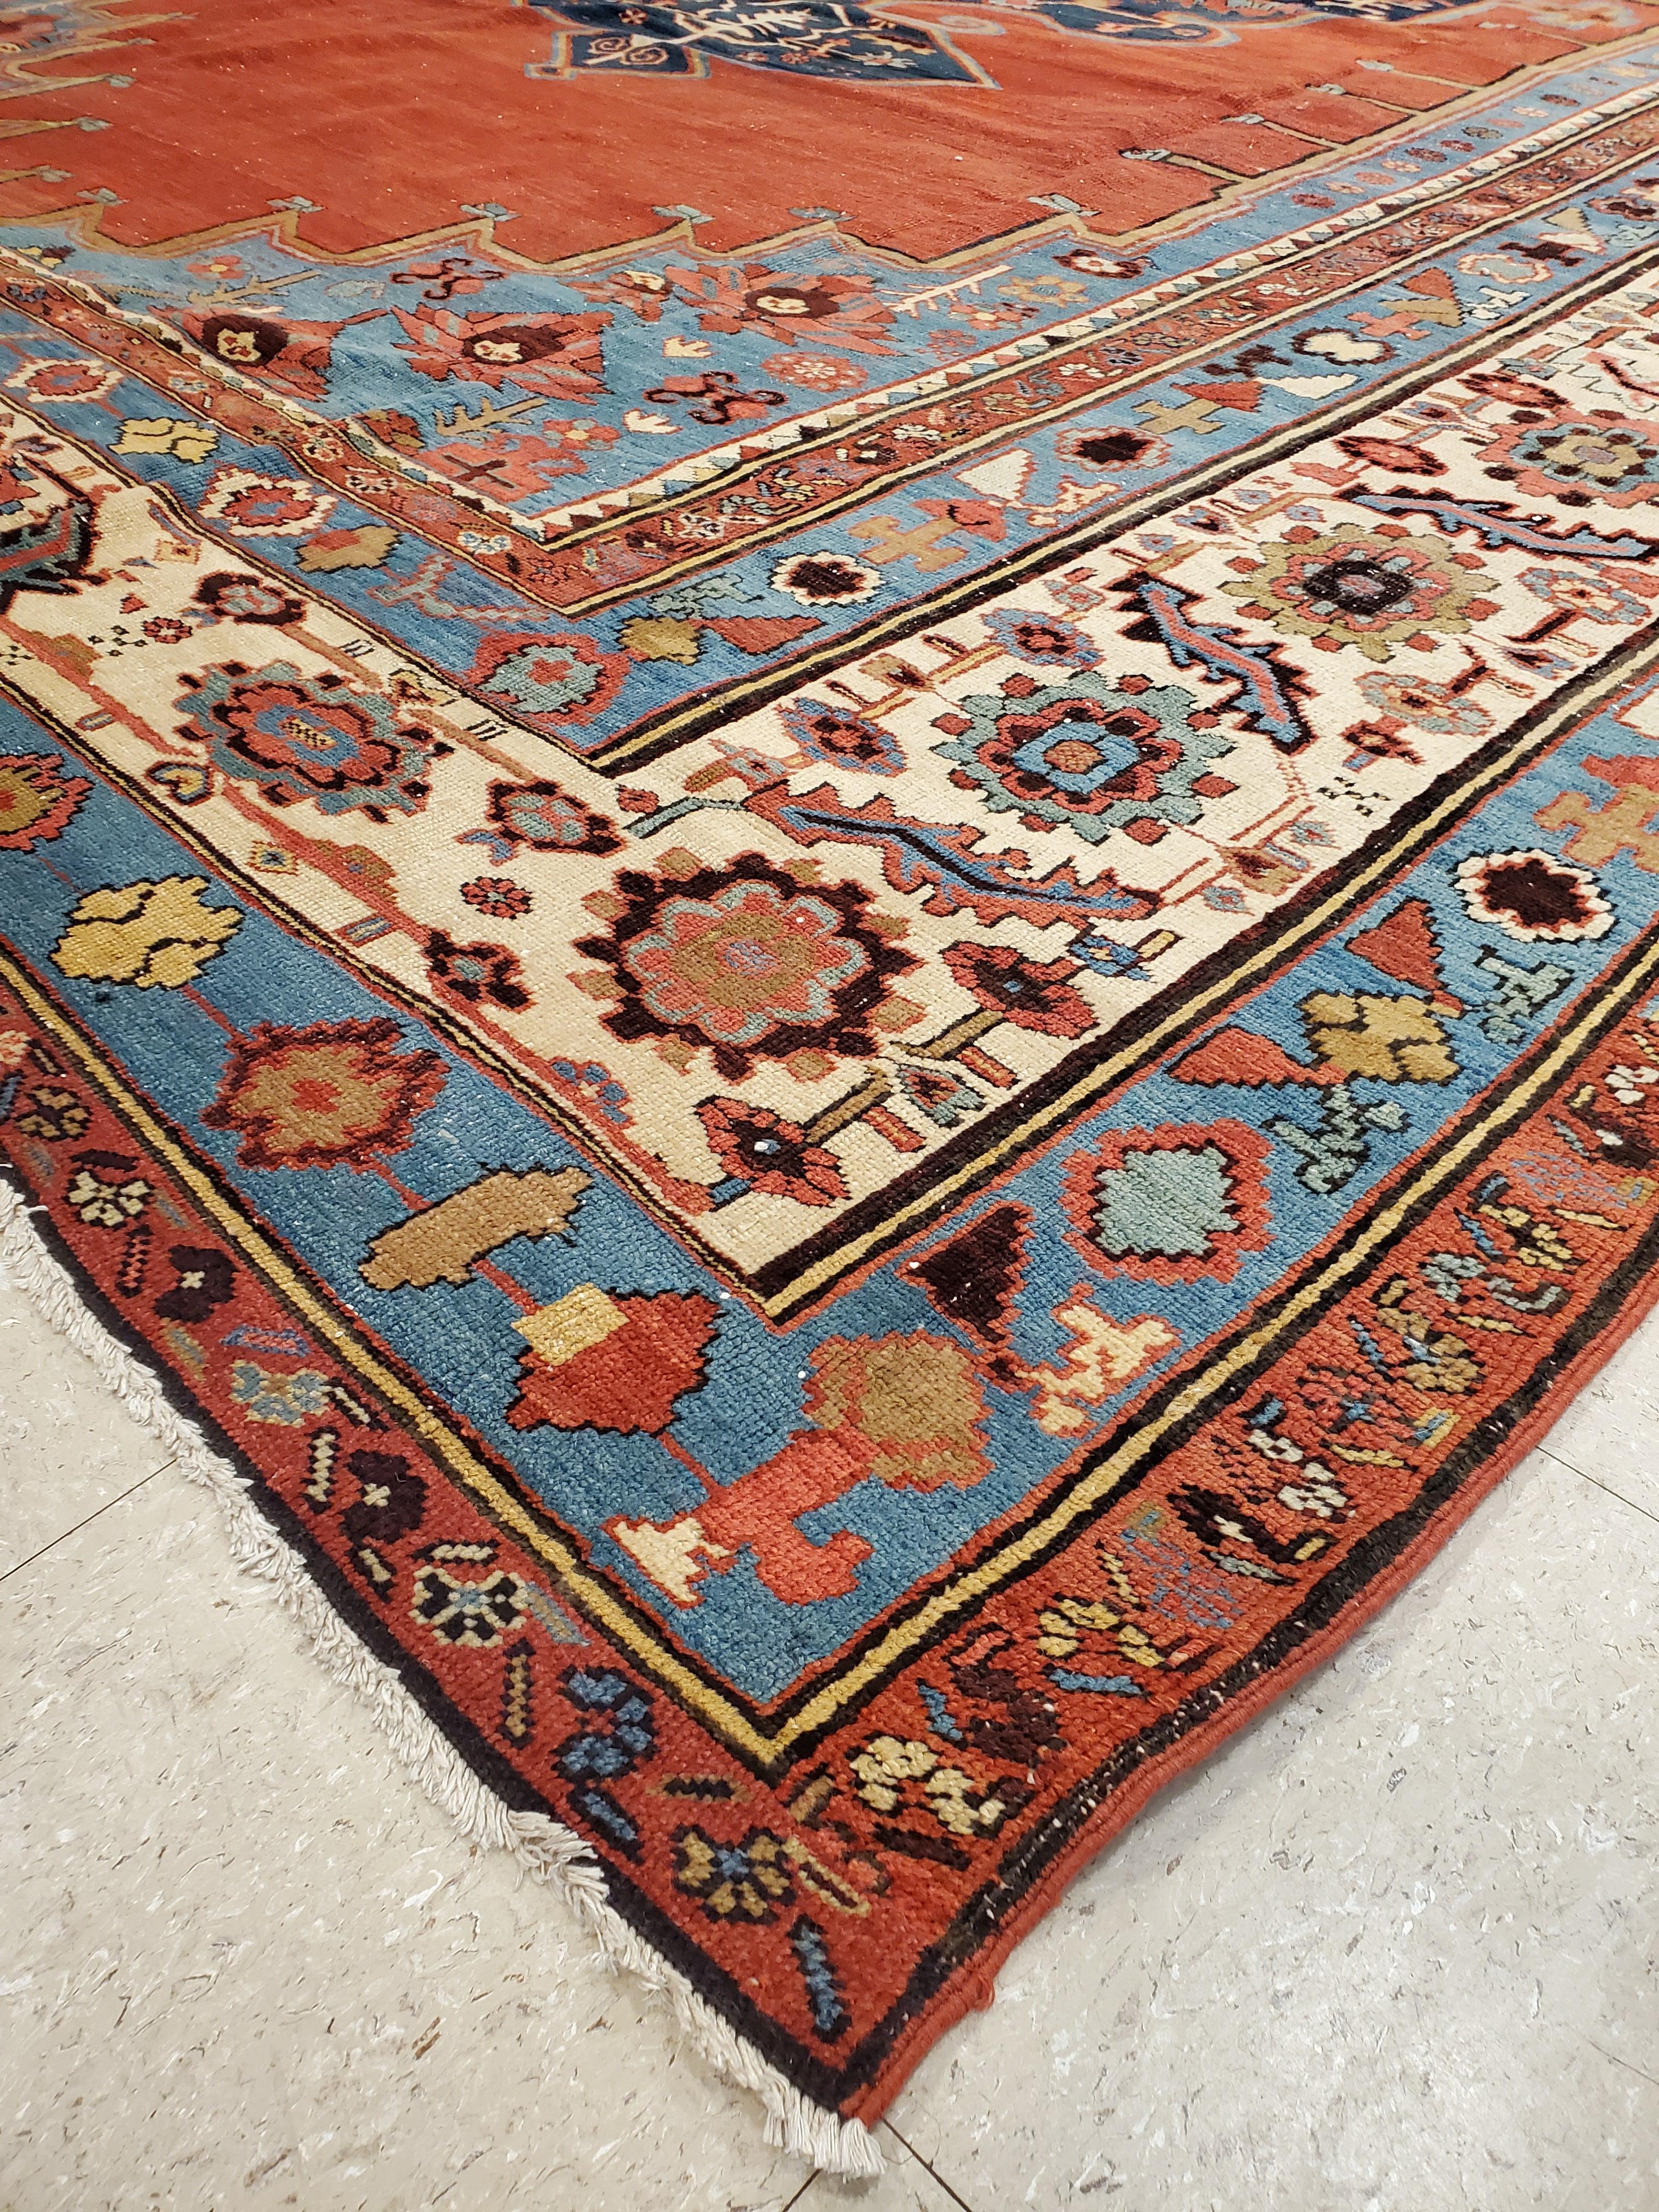 Antique Bakshaish Carpet, Oriental Persian Handmade in Ivory, Blue and Red For Sale 3